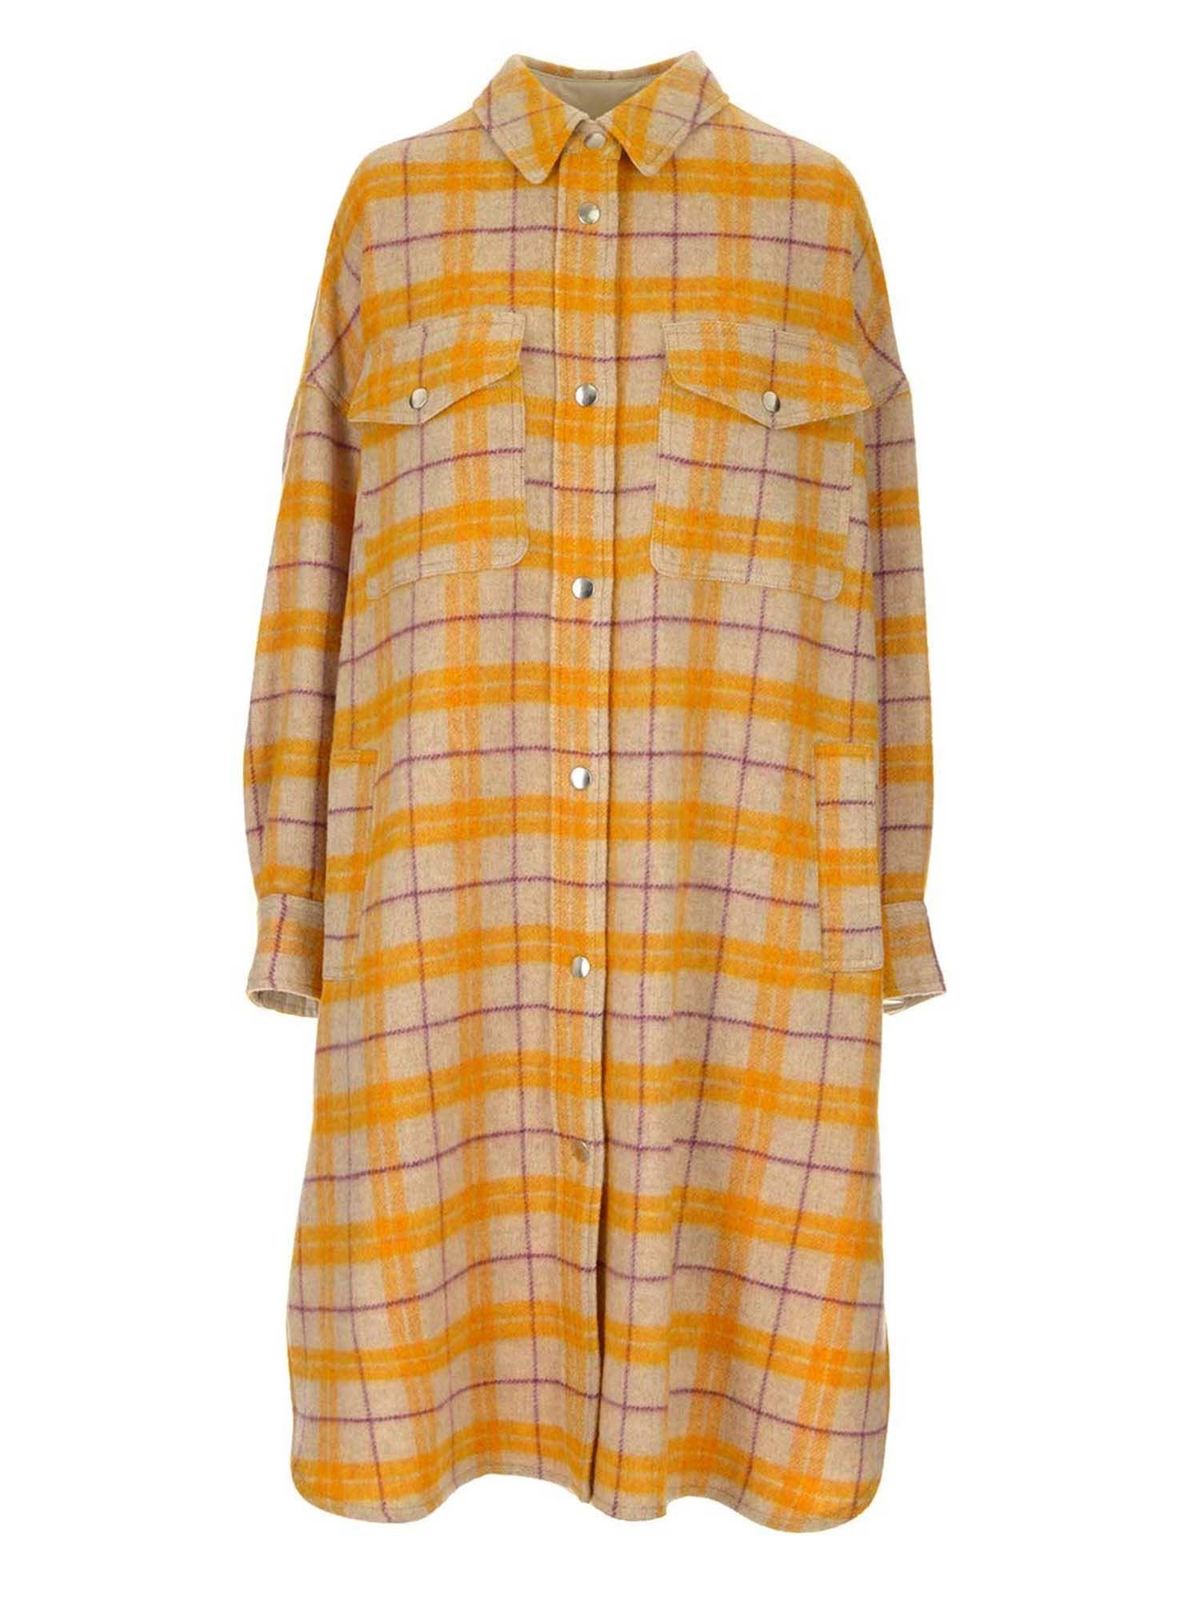 Isabel marant etoile - Fontia checked coat in yellow - knee length ...